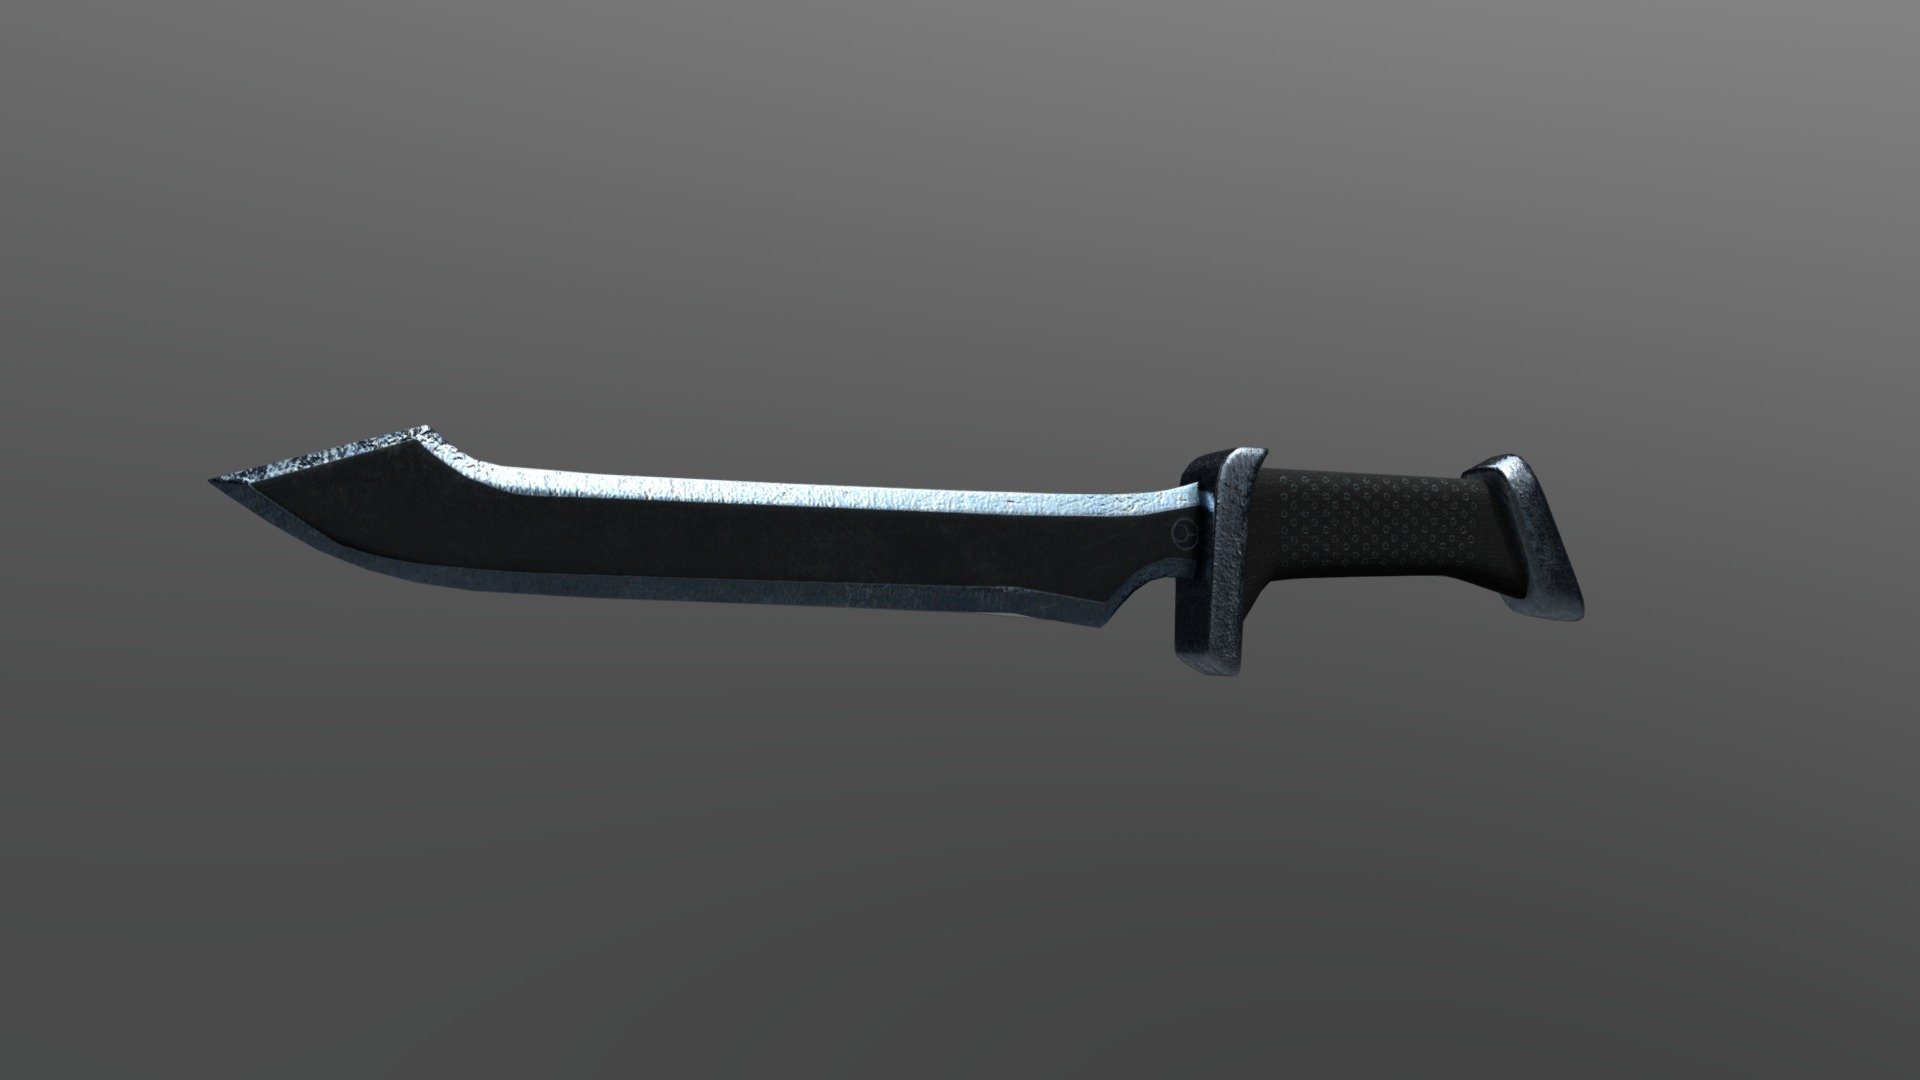 This model is based off of the cut human melee weapon from Halo: Combat Evolved, more commonly known as the swords in the difficulty icons/sigils.

Model made in Blender, textured in Gimp.

Halo franchise belongs to 343 Industries and Microsoft - Halo UNSC Machete - Download Free 3D model by Aegis_Wolf 3d model